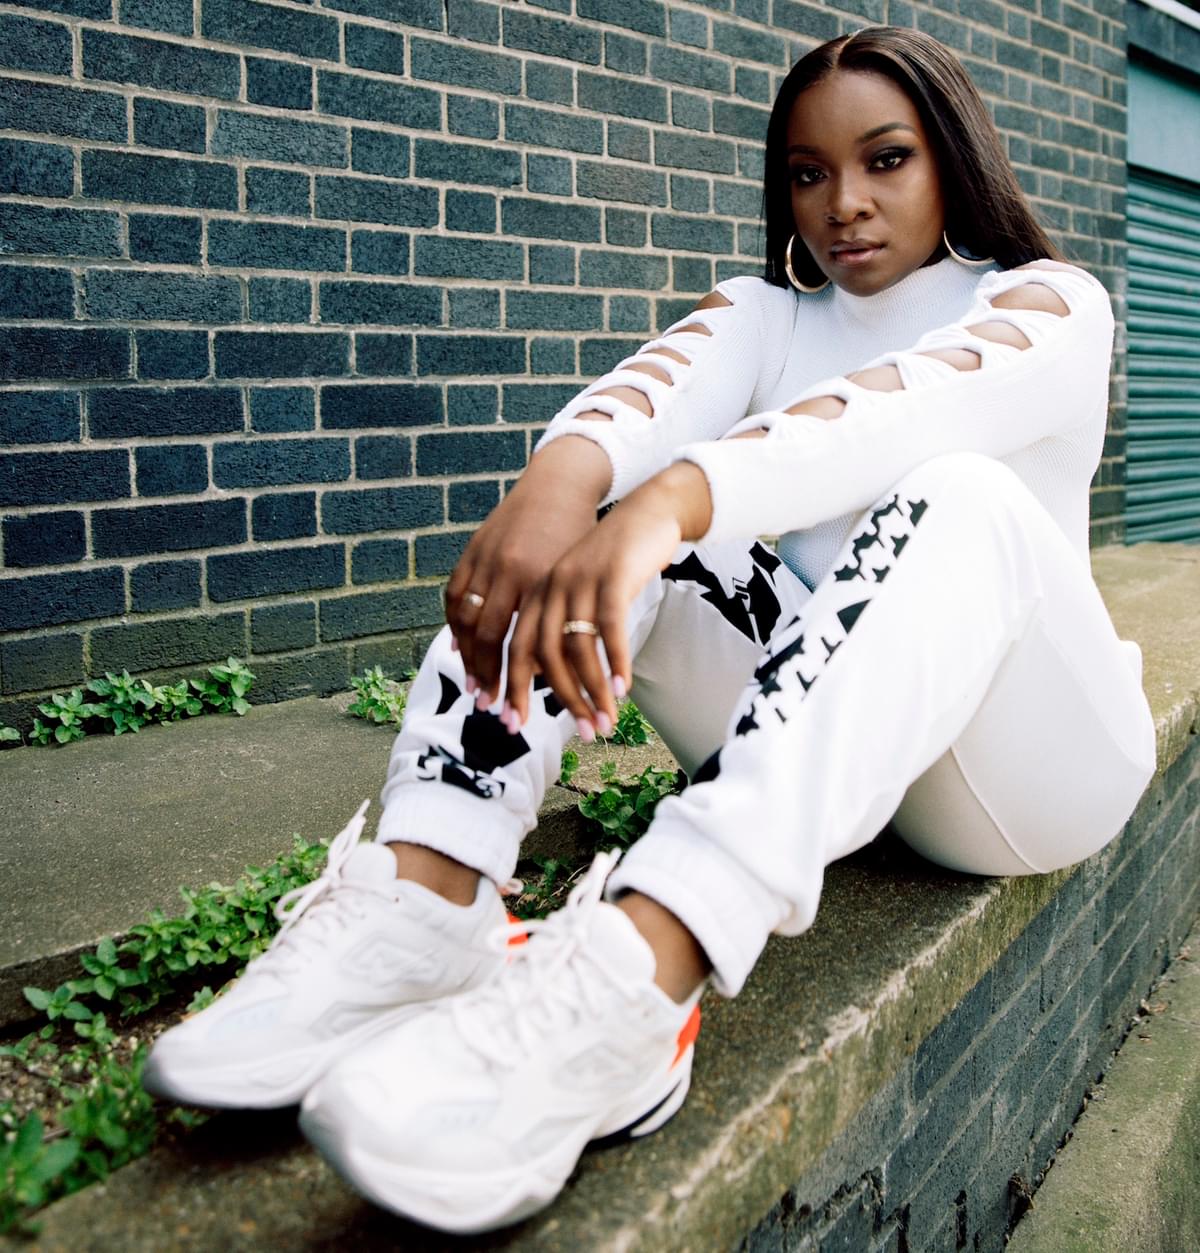 Ray blk 2018